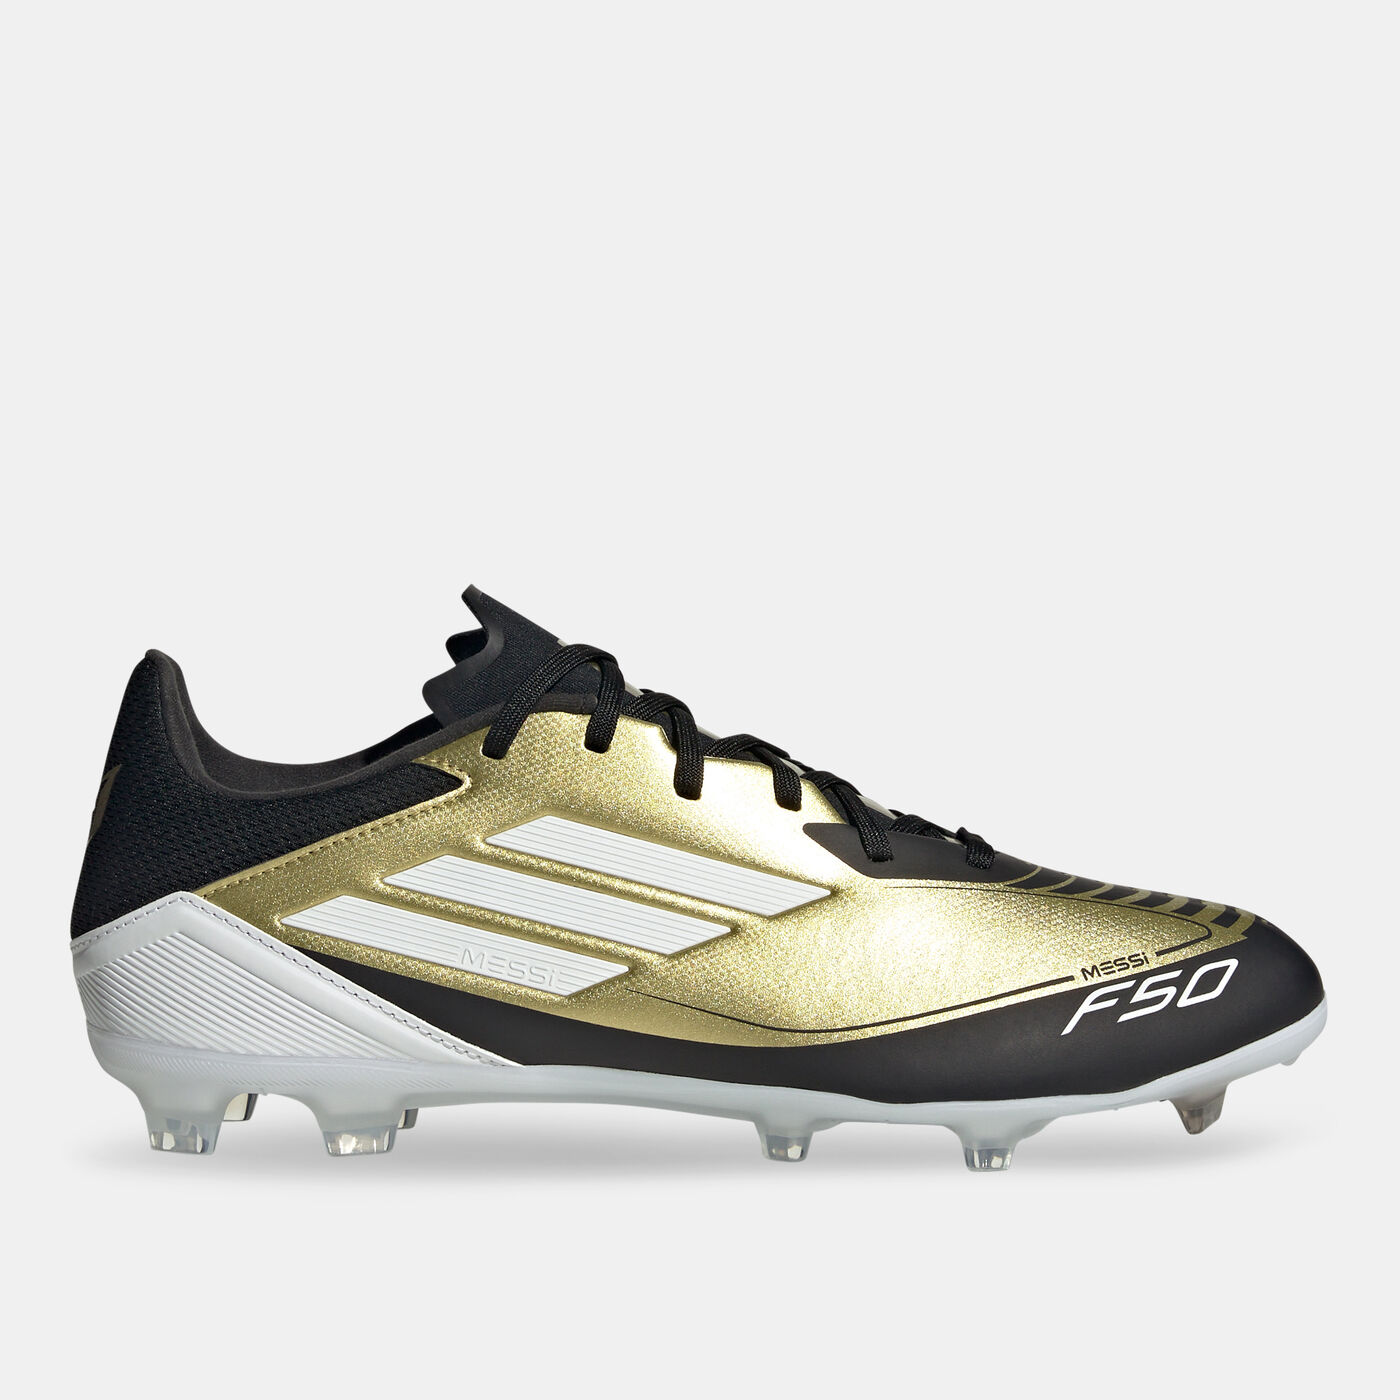 Men's F50 League Messi Firm Ground/Multi-Ground Football Shoes